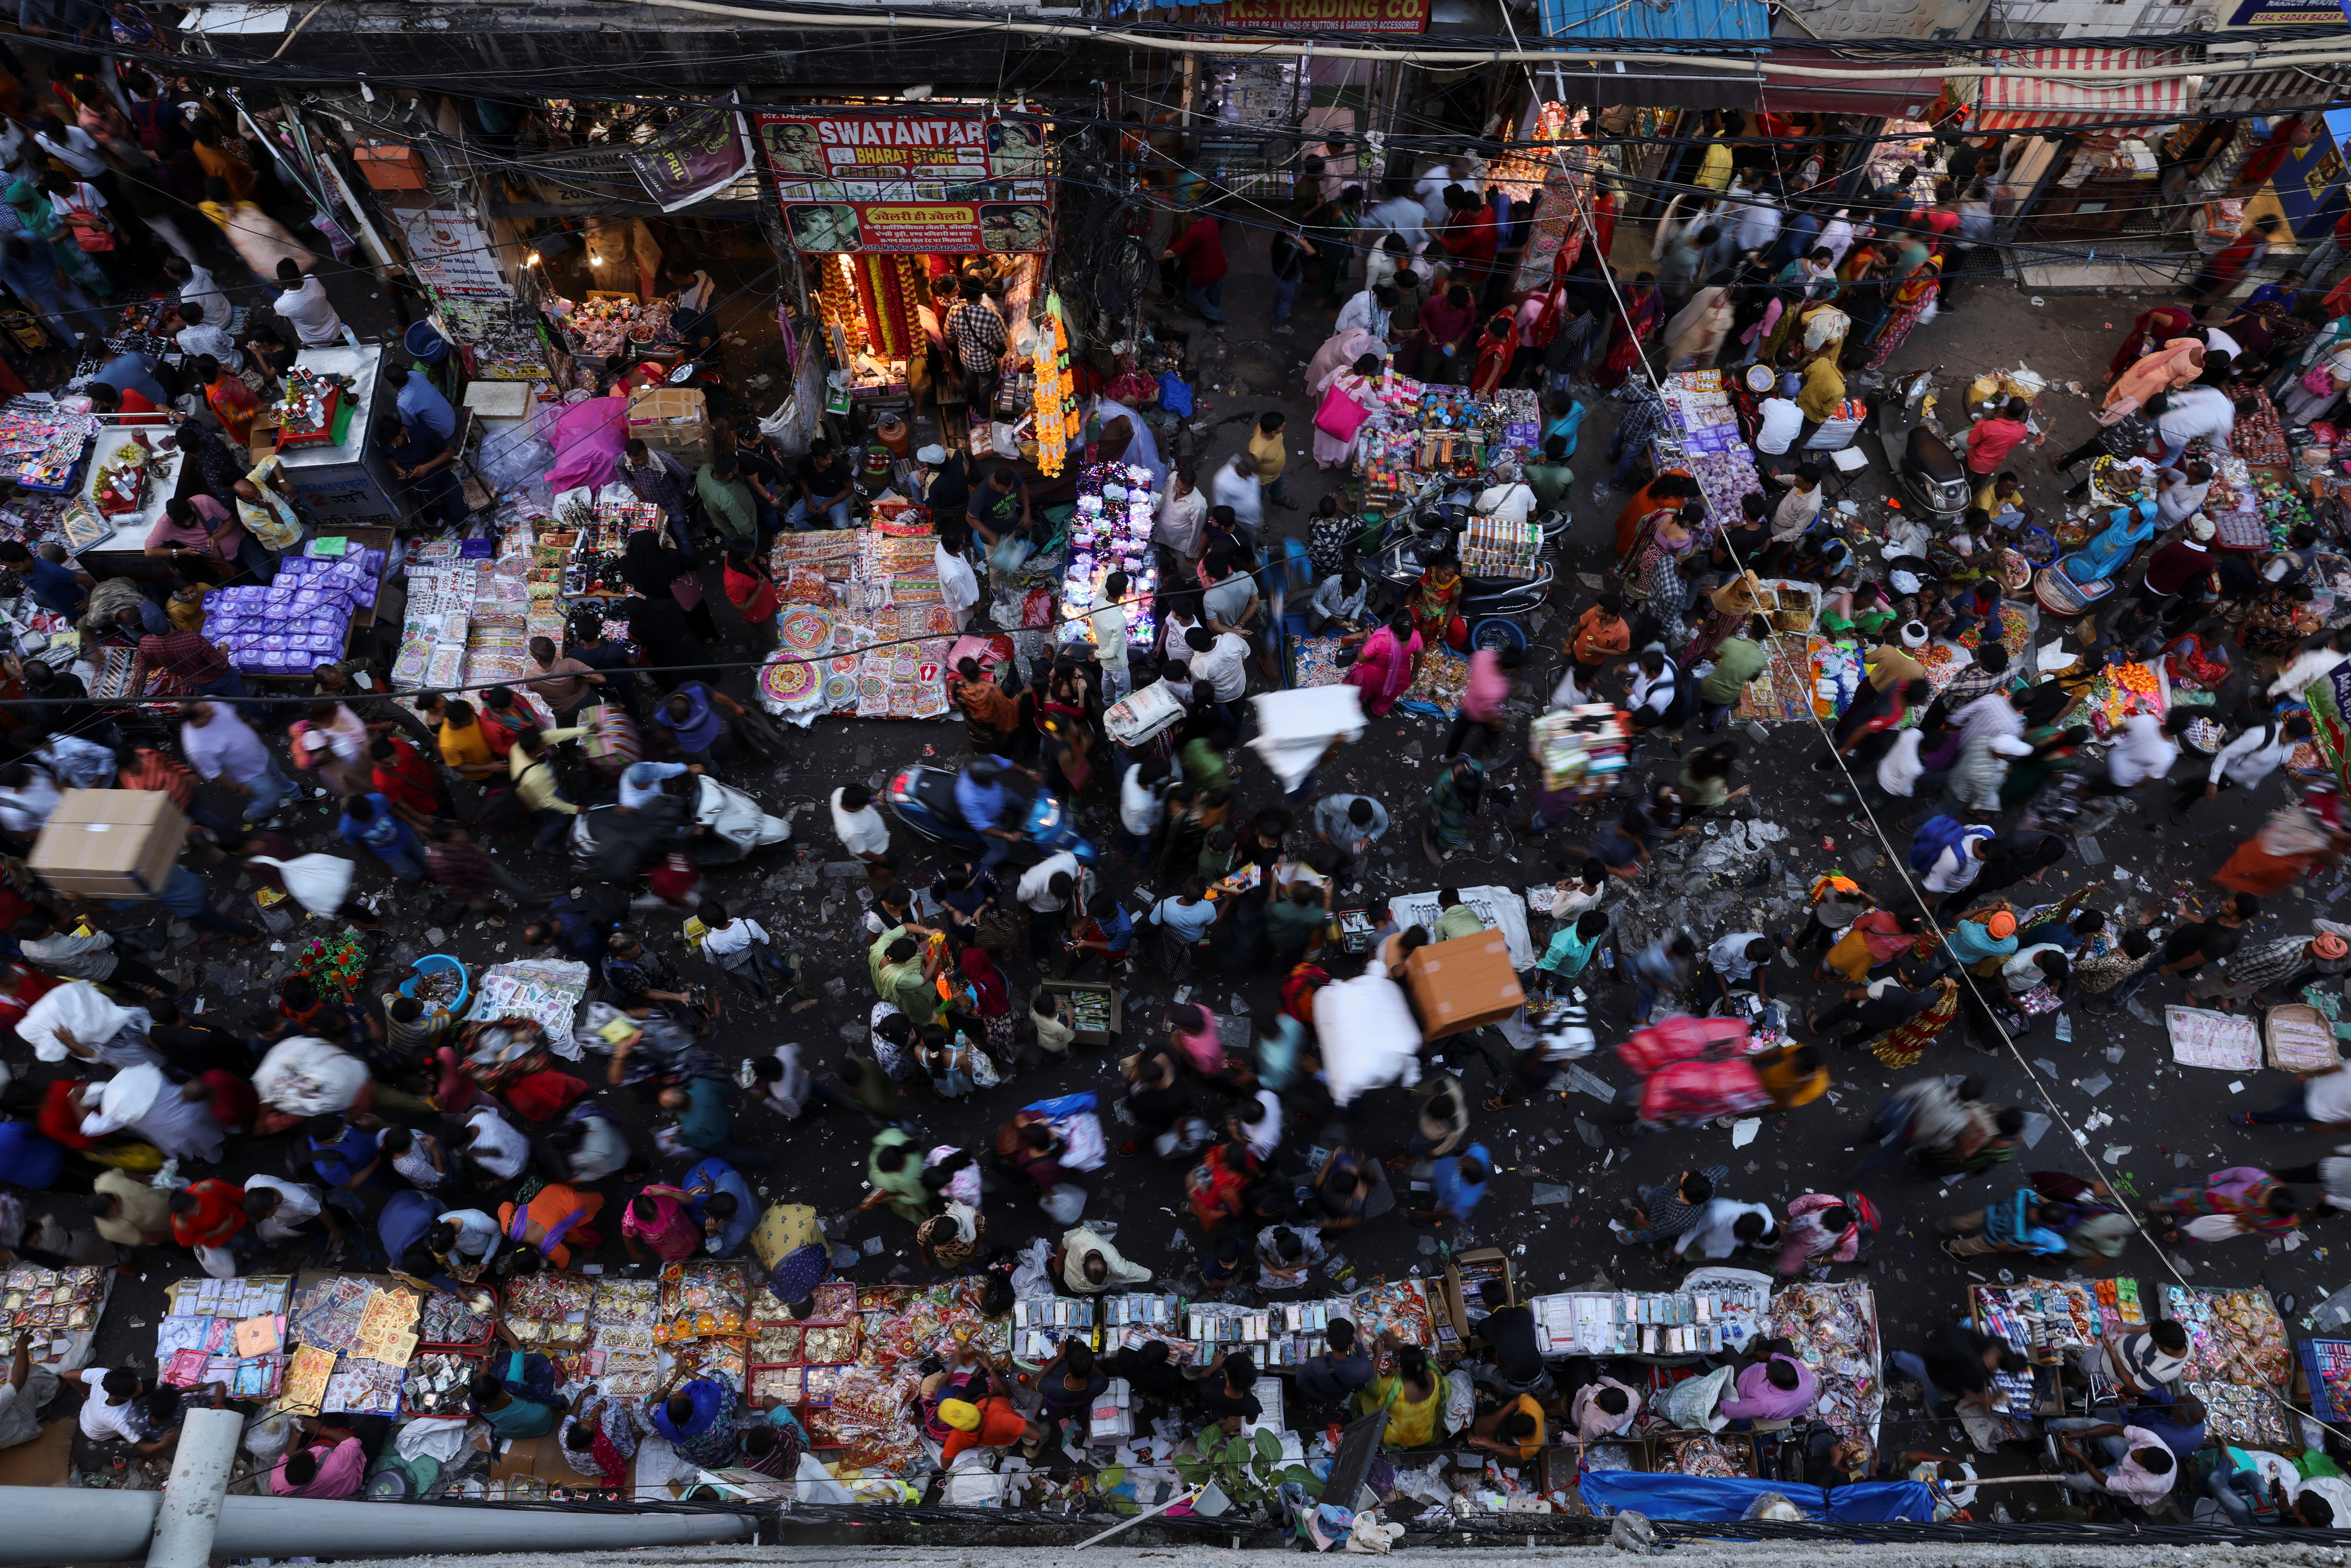 People shop in a crowded market in Delhi's Old Quarter ahead of Diwali, the Hindu festival of lights.